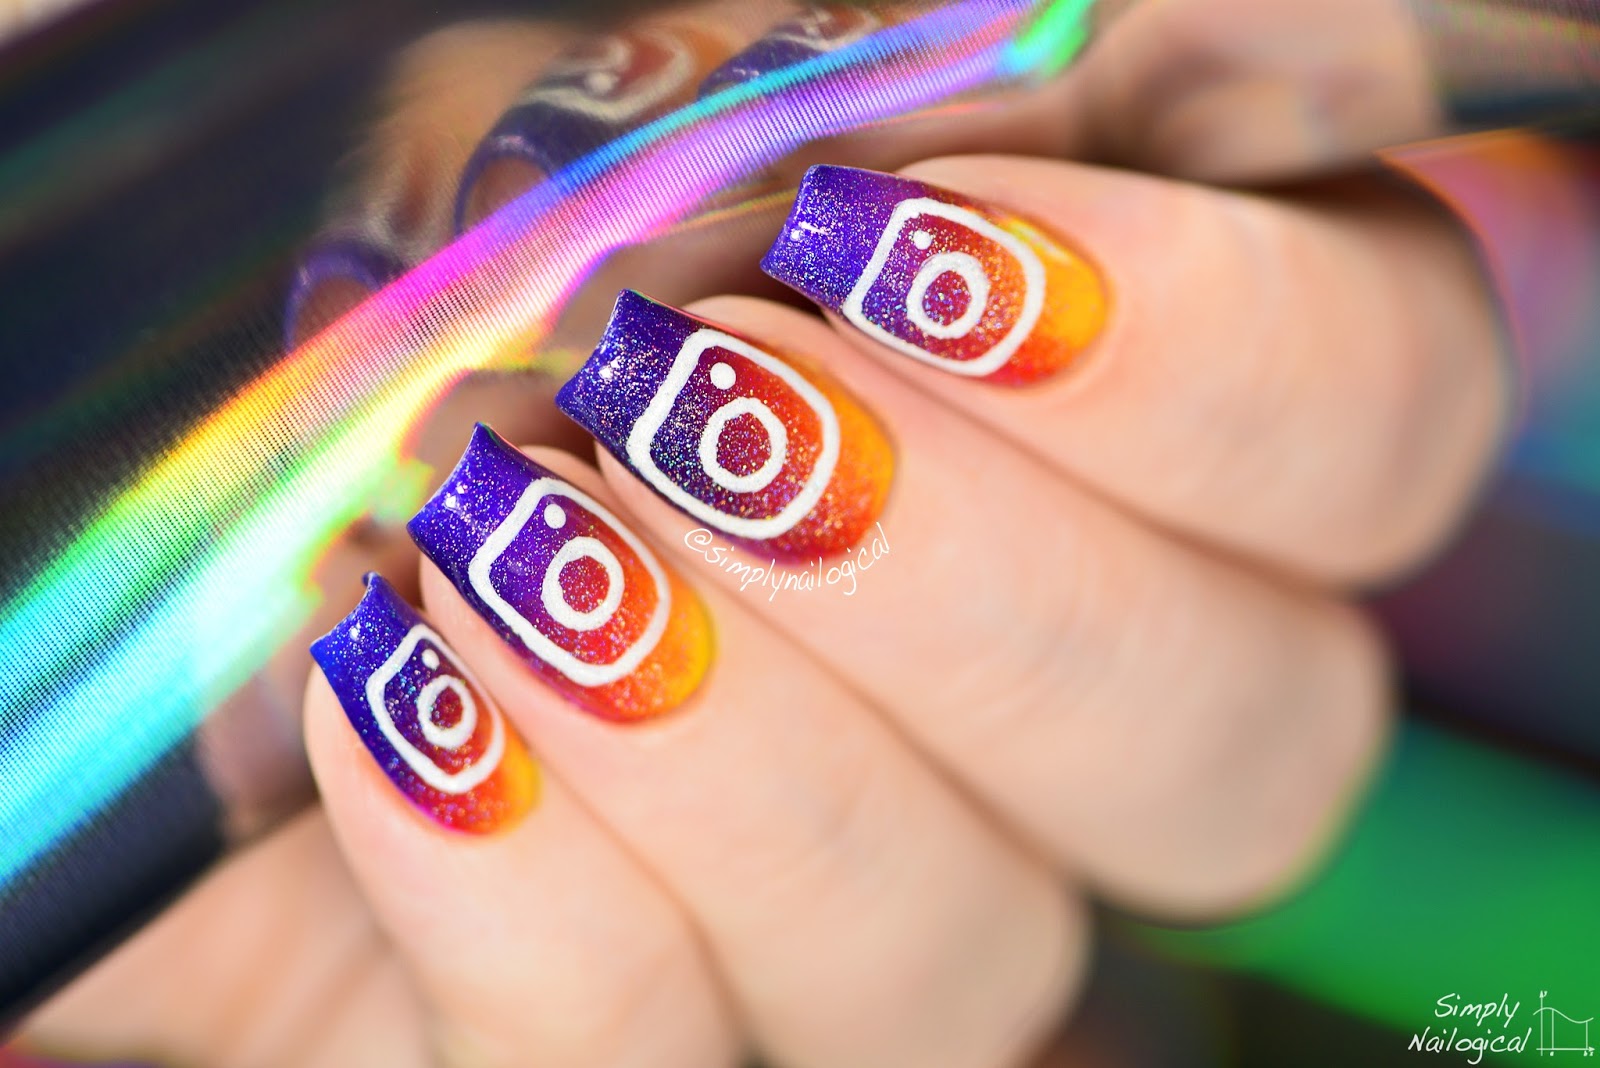 7. How to Use Simply Nailogical's Gradient Nail Art Kit - wide 10